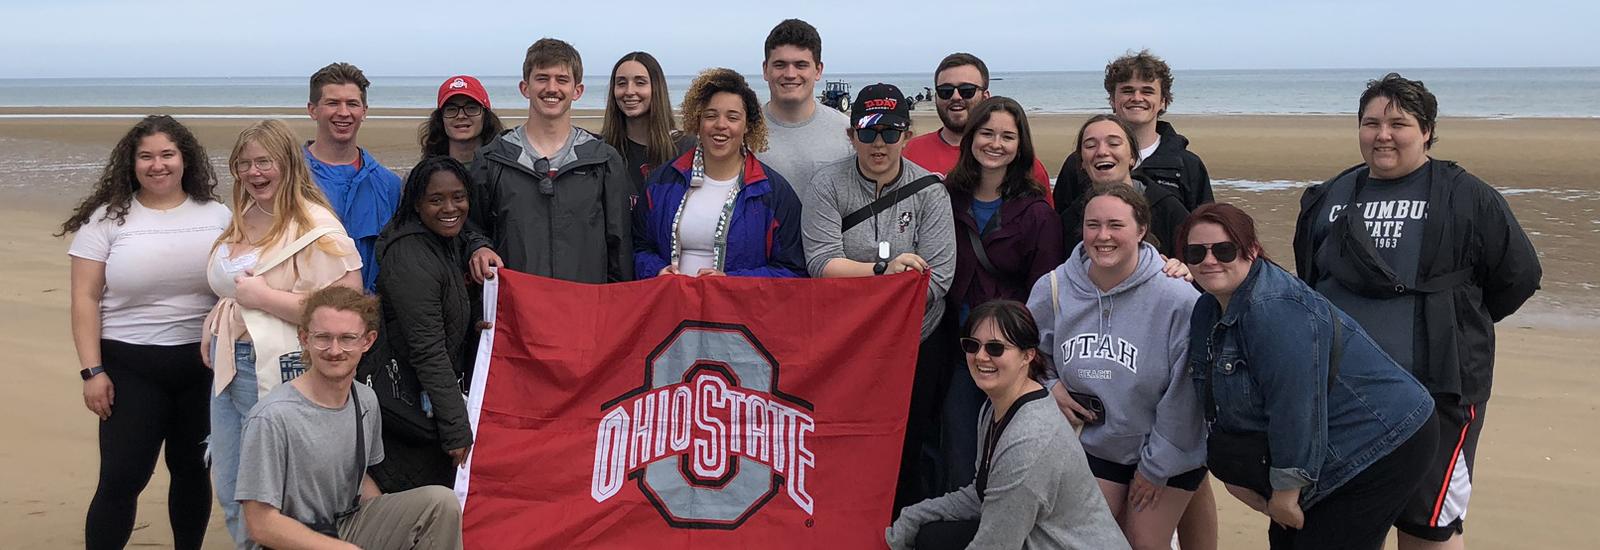 Students standing on Omaha Beach holding the Ohio State flag